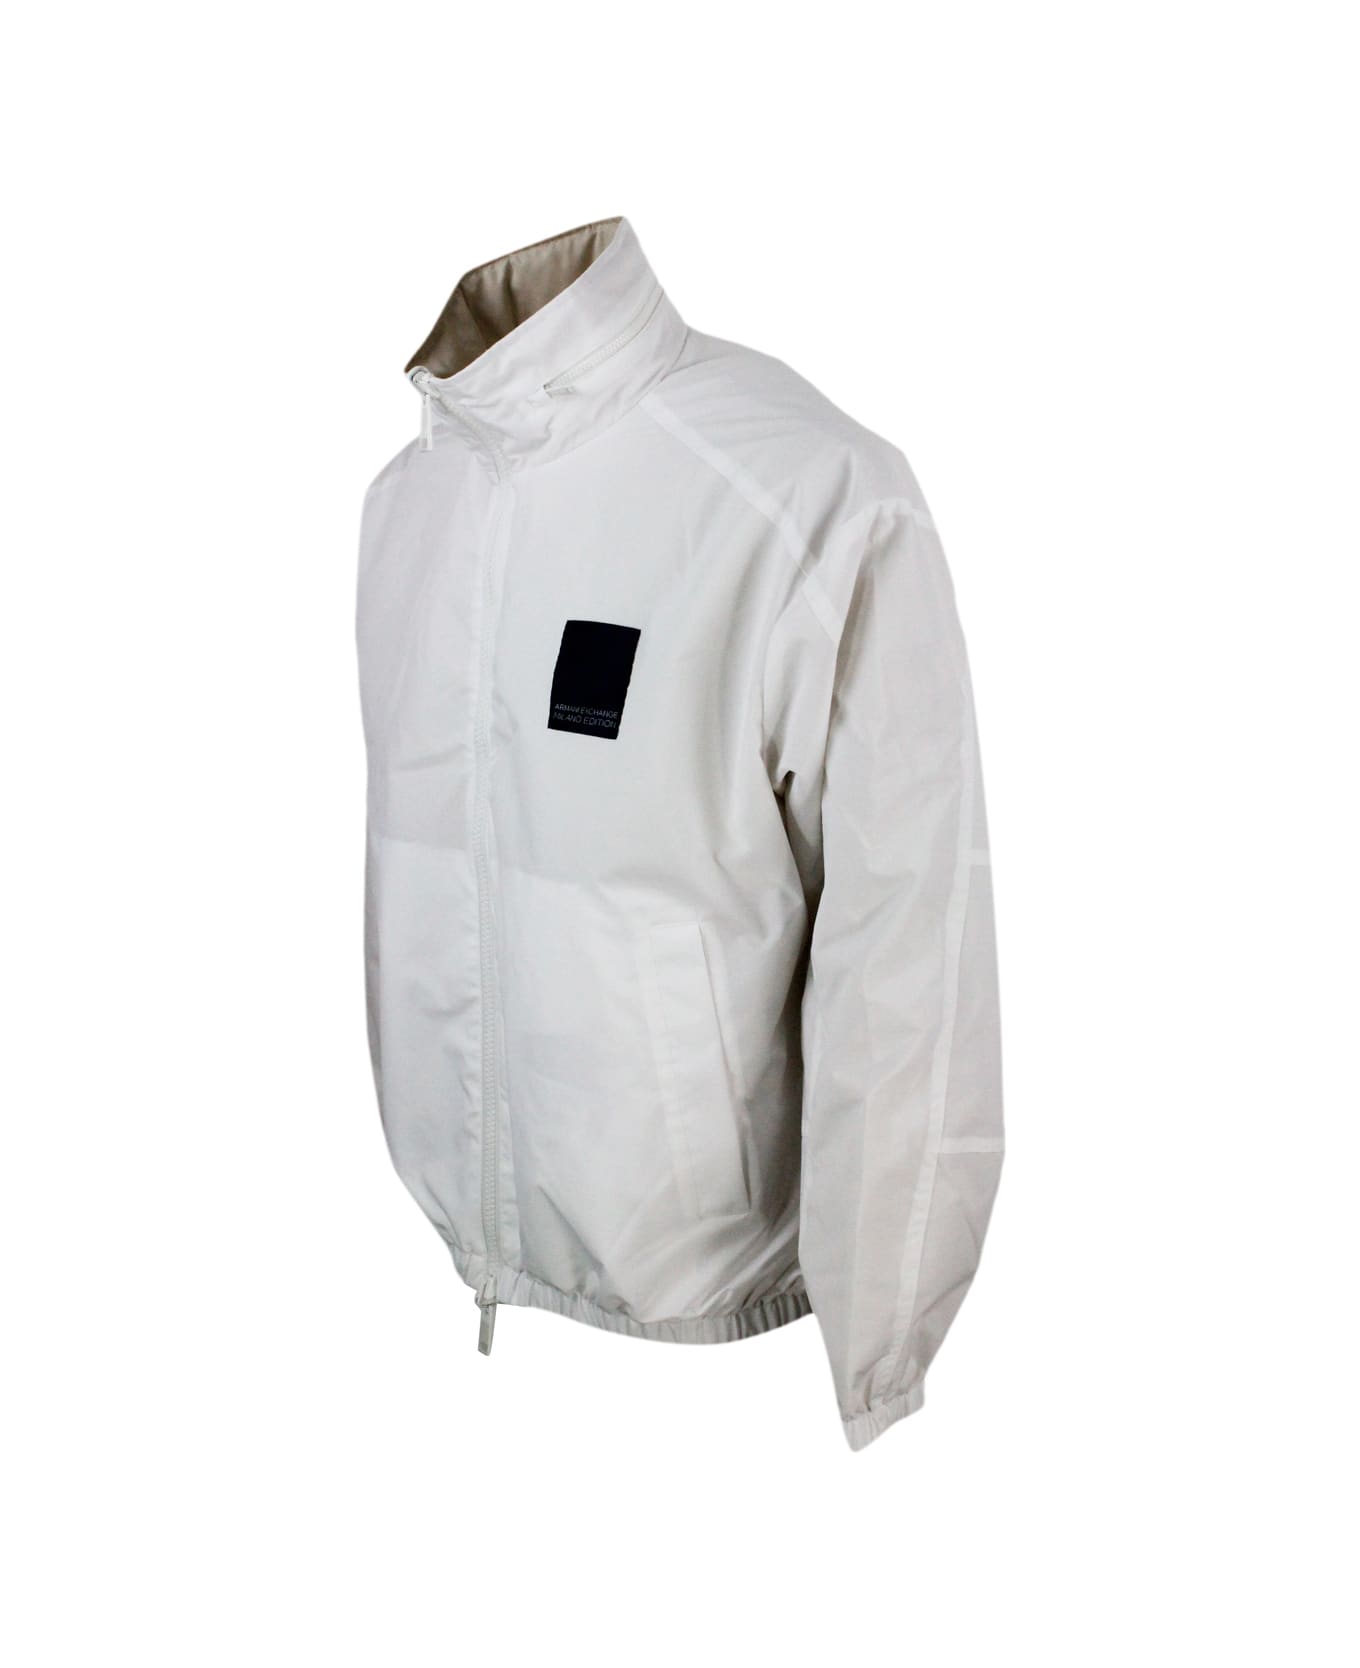 Armani Collezioni Reversible Windproof Jacket In Light Technical Fabric, Milano Edition Line, Zip Closure And Concealed Hood - White ジャケット